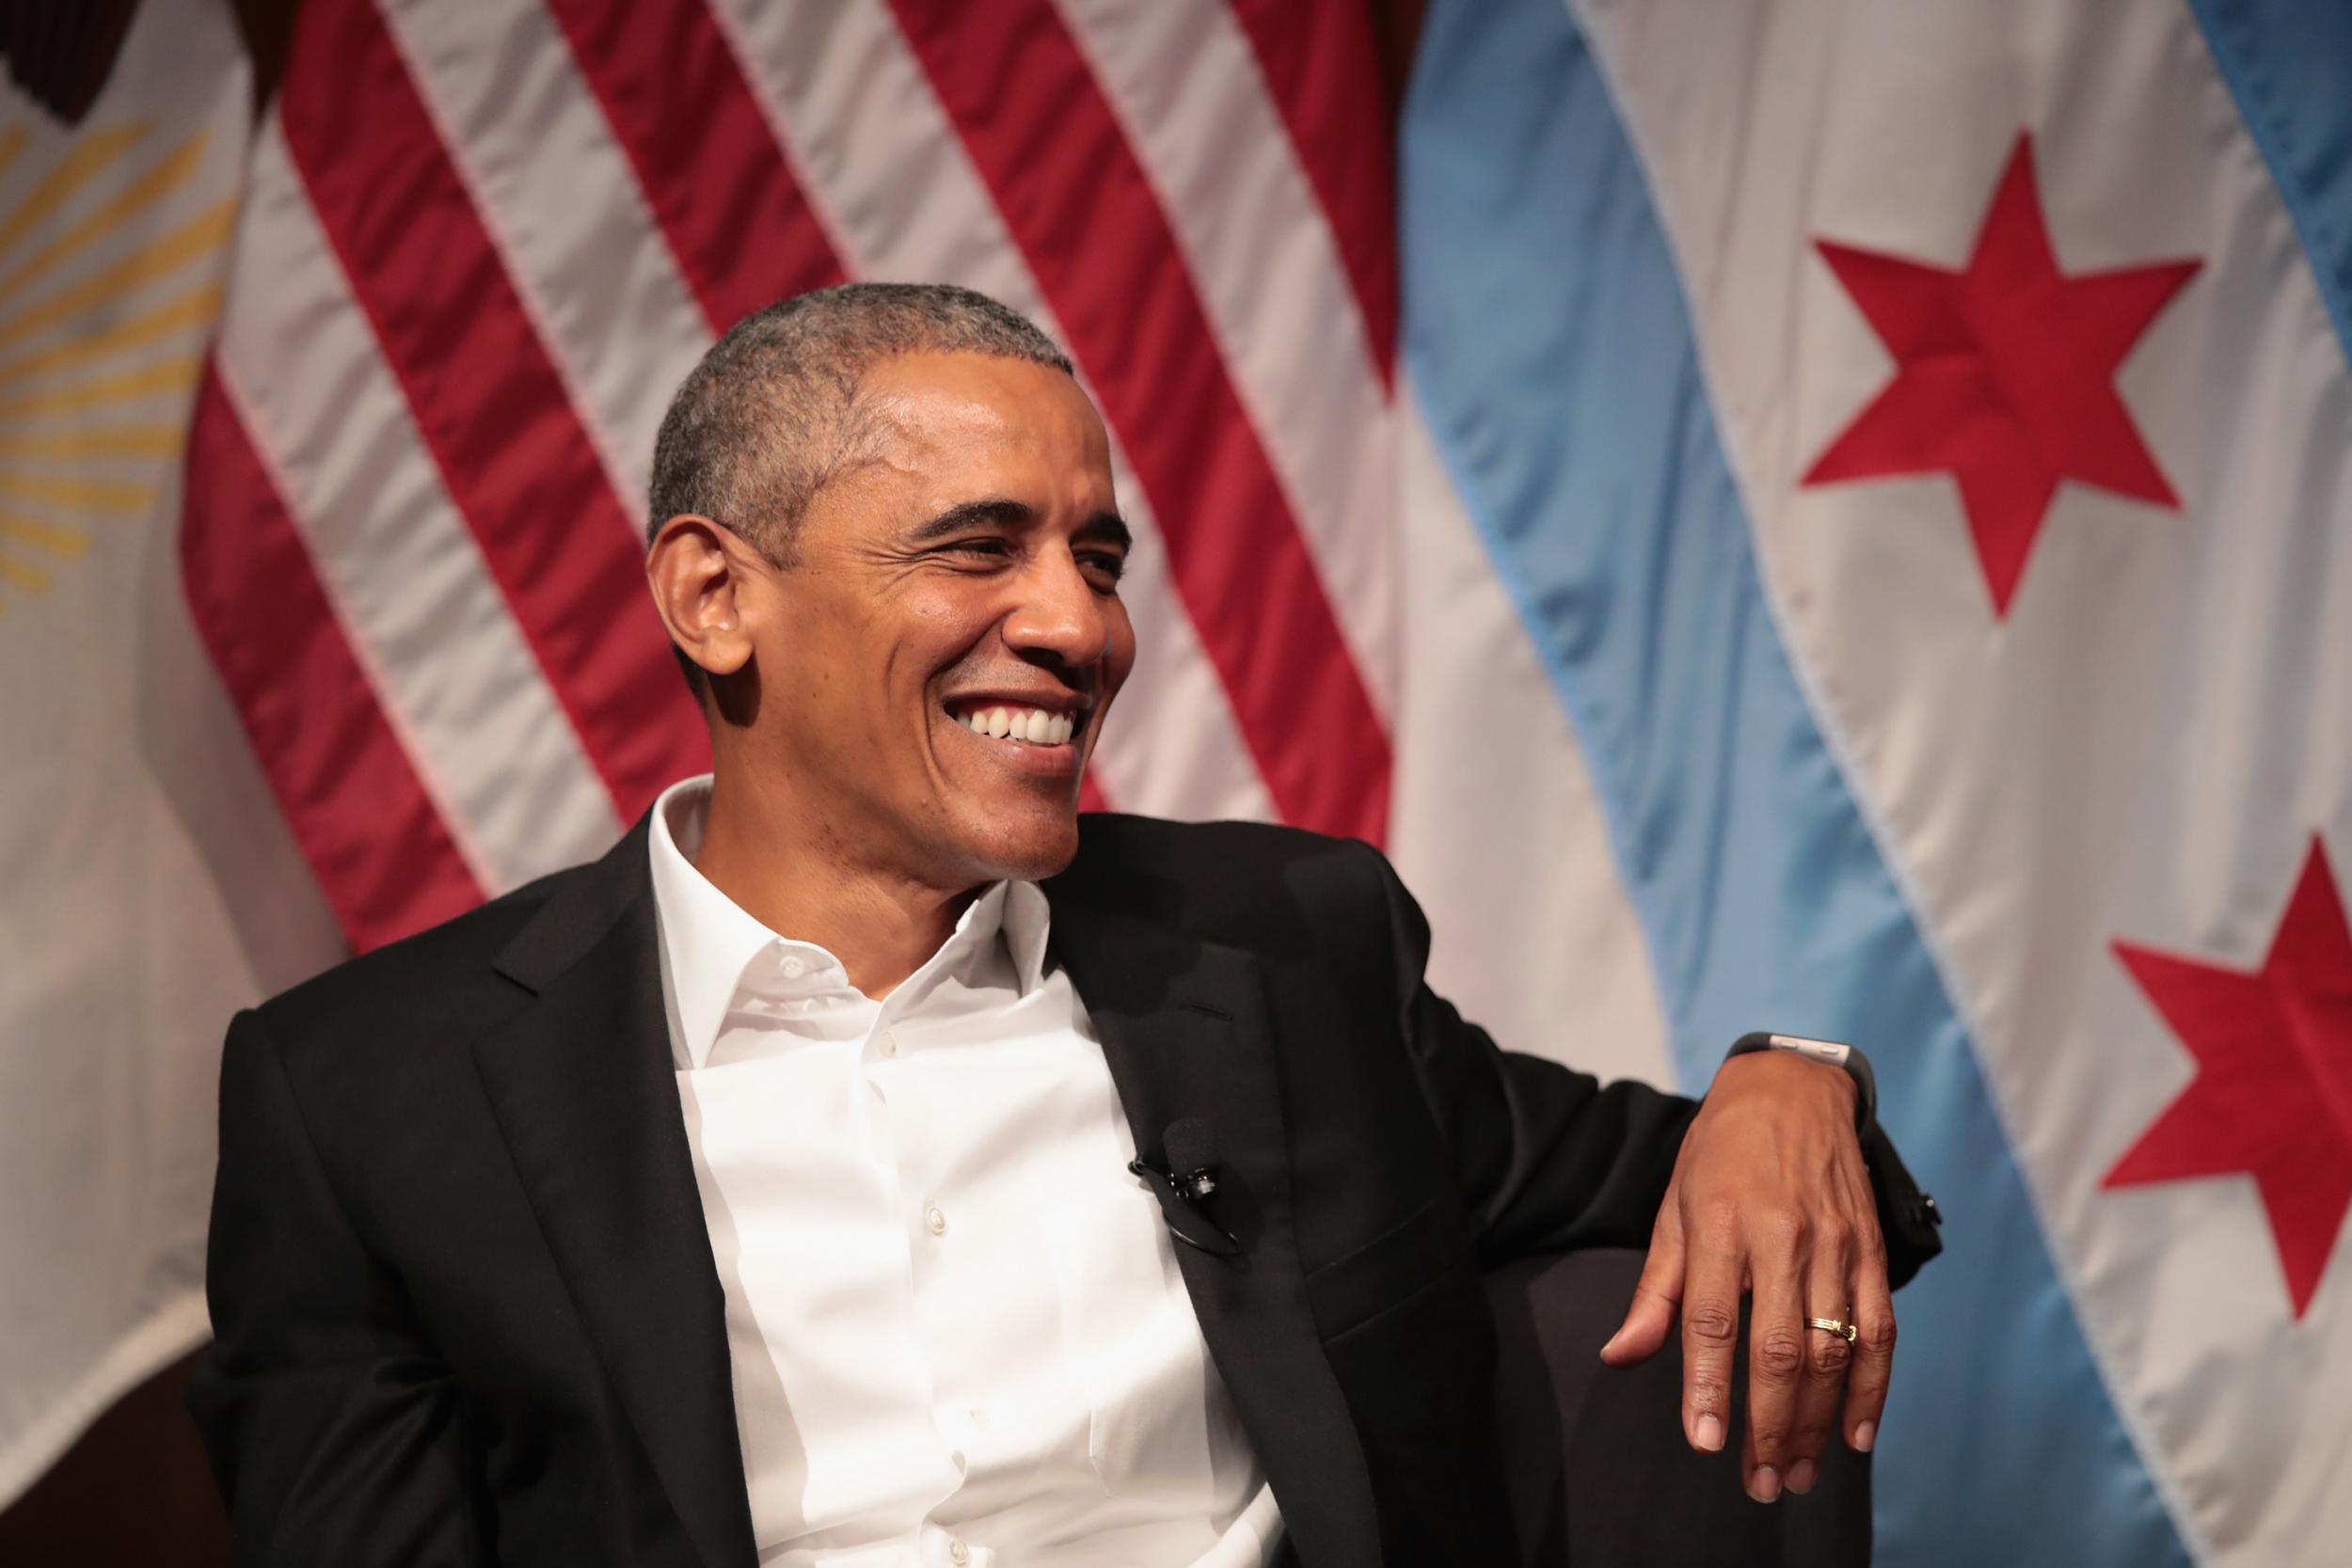 Obama is set to make at least $800,000 from paid speeches this year